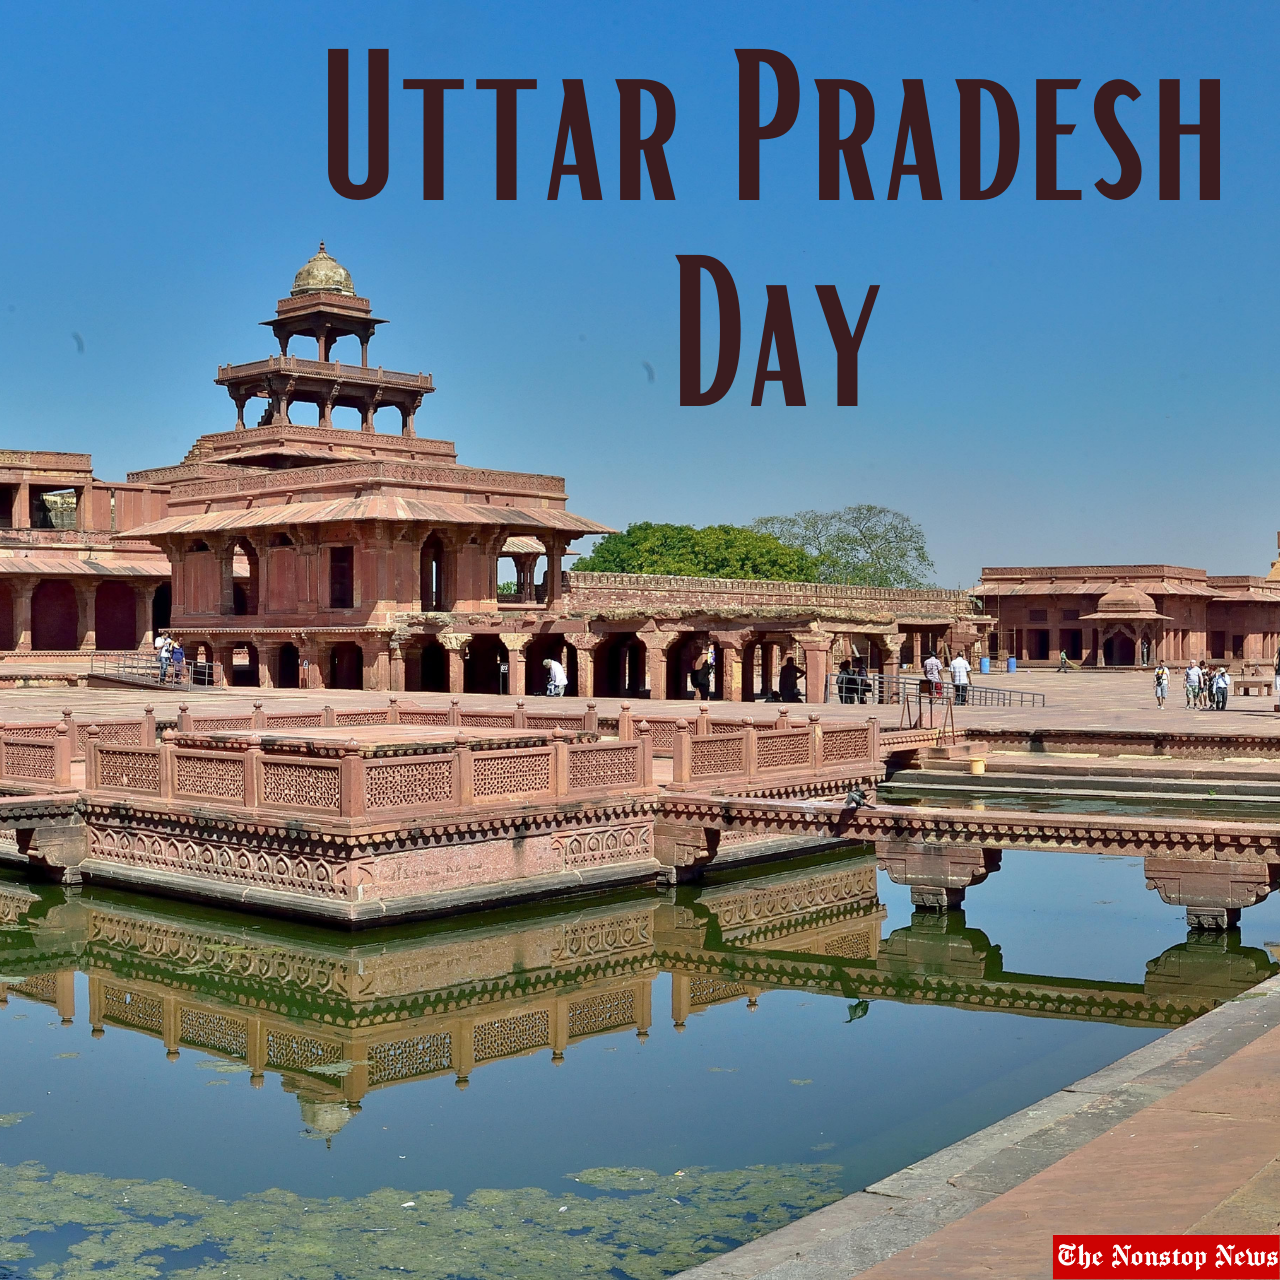 Uttar Pradesh Day 2022: Date, History, Significance, Importance, and everything you need to know about its Foundation Day